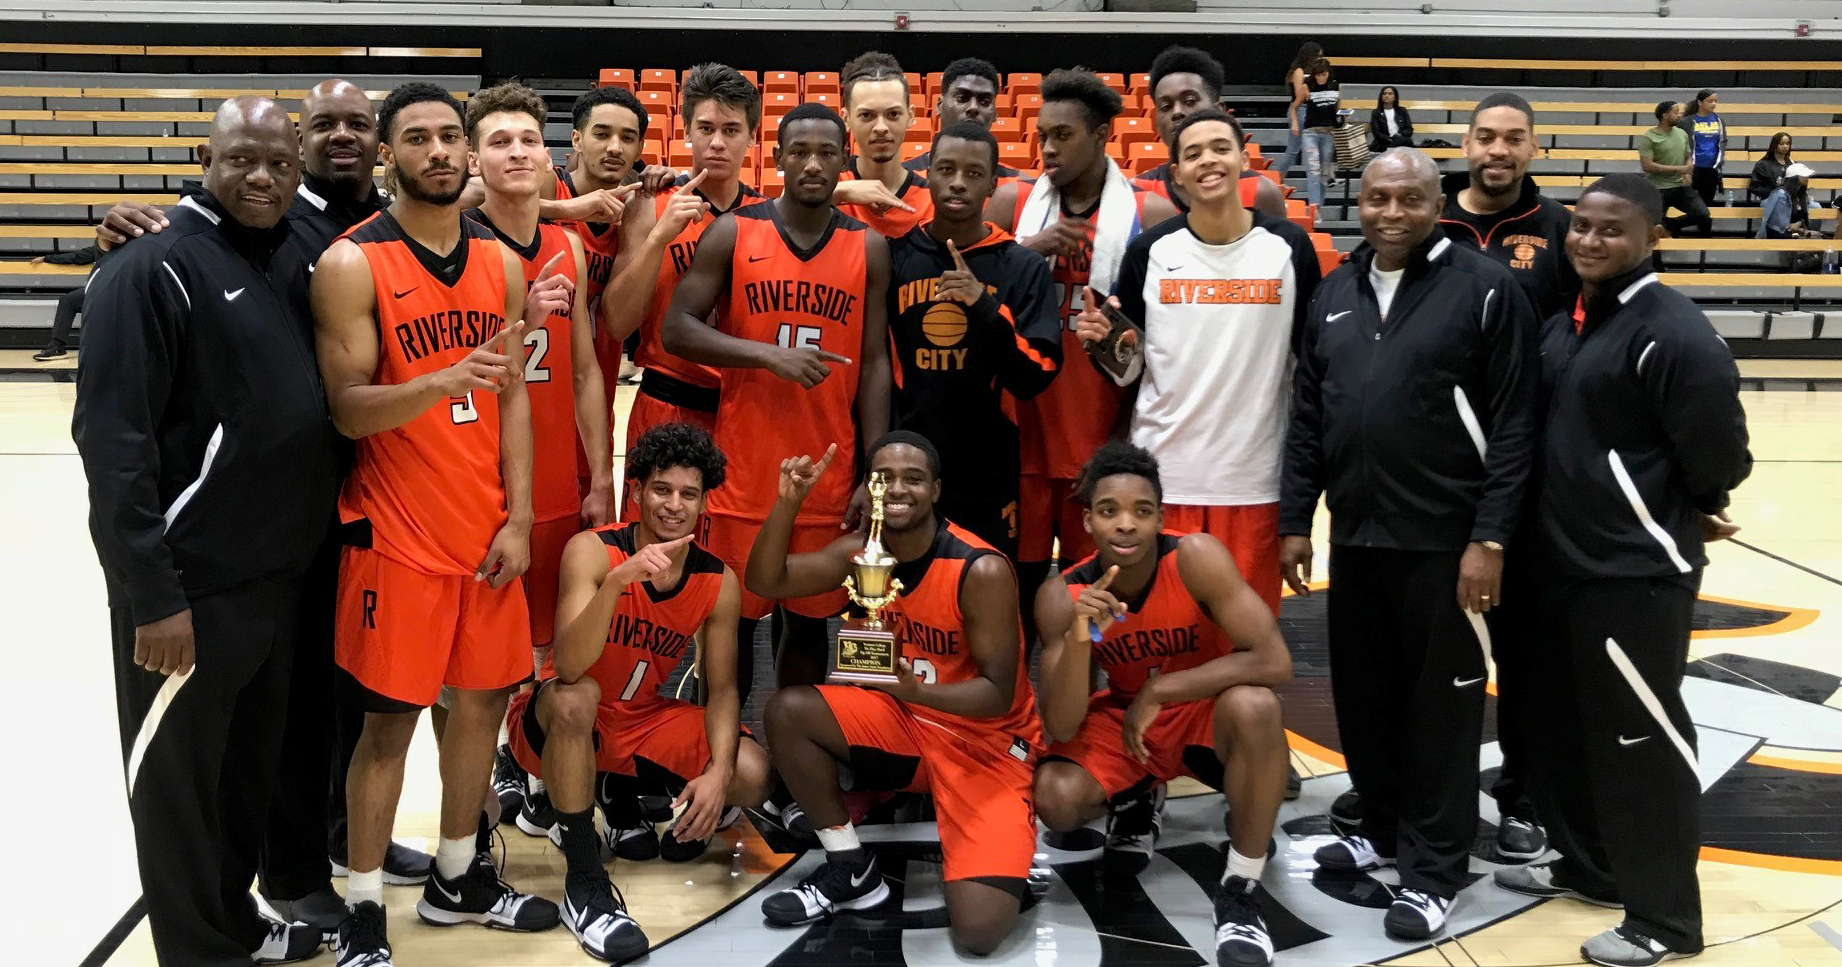 Men's basketball hoists the Ventura College Championship trophy after defeating Orange Coast in the finals. The Tigers begin their season 3-0. (Photo compliments of Tommie Denson)